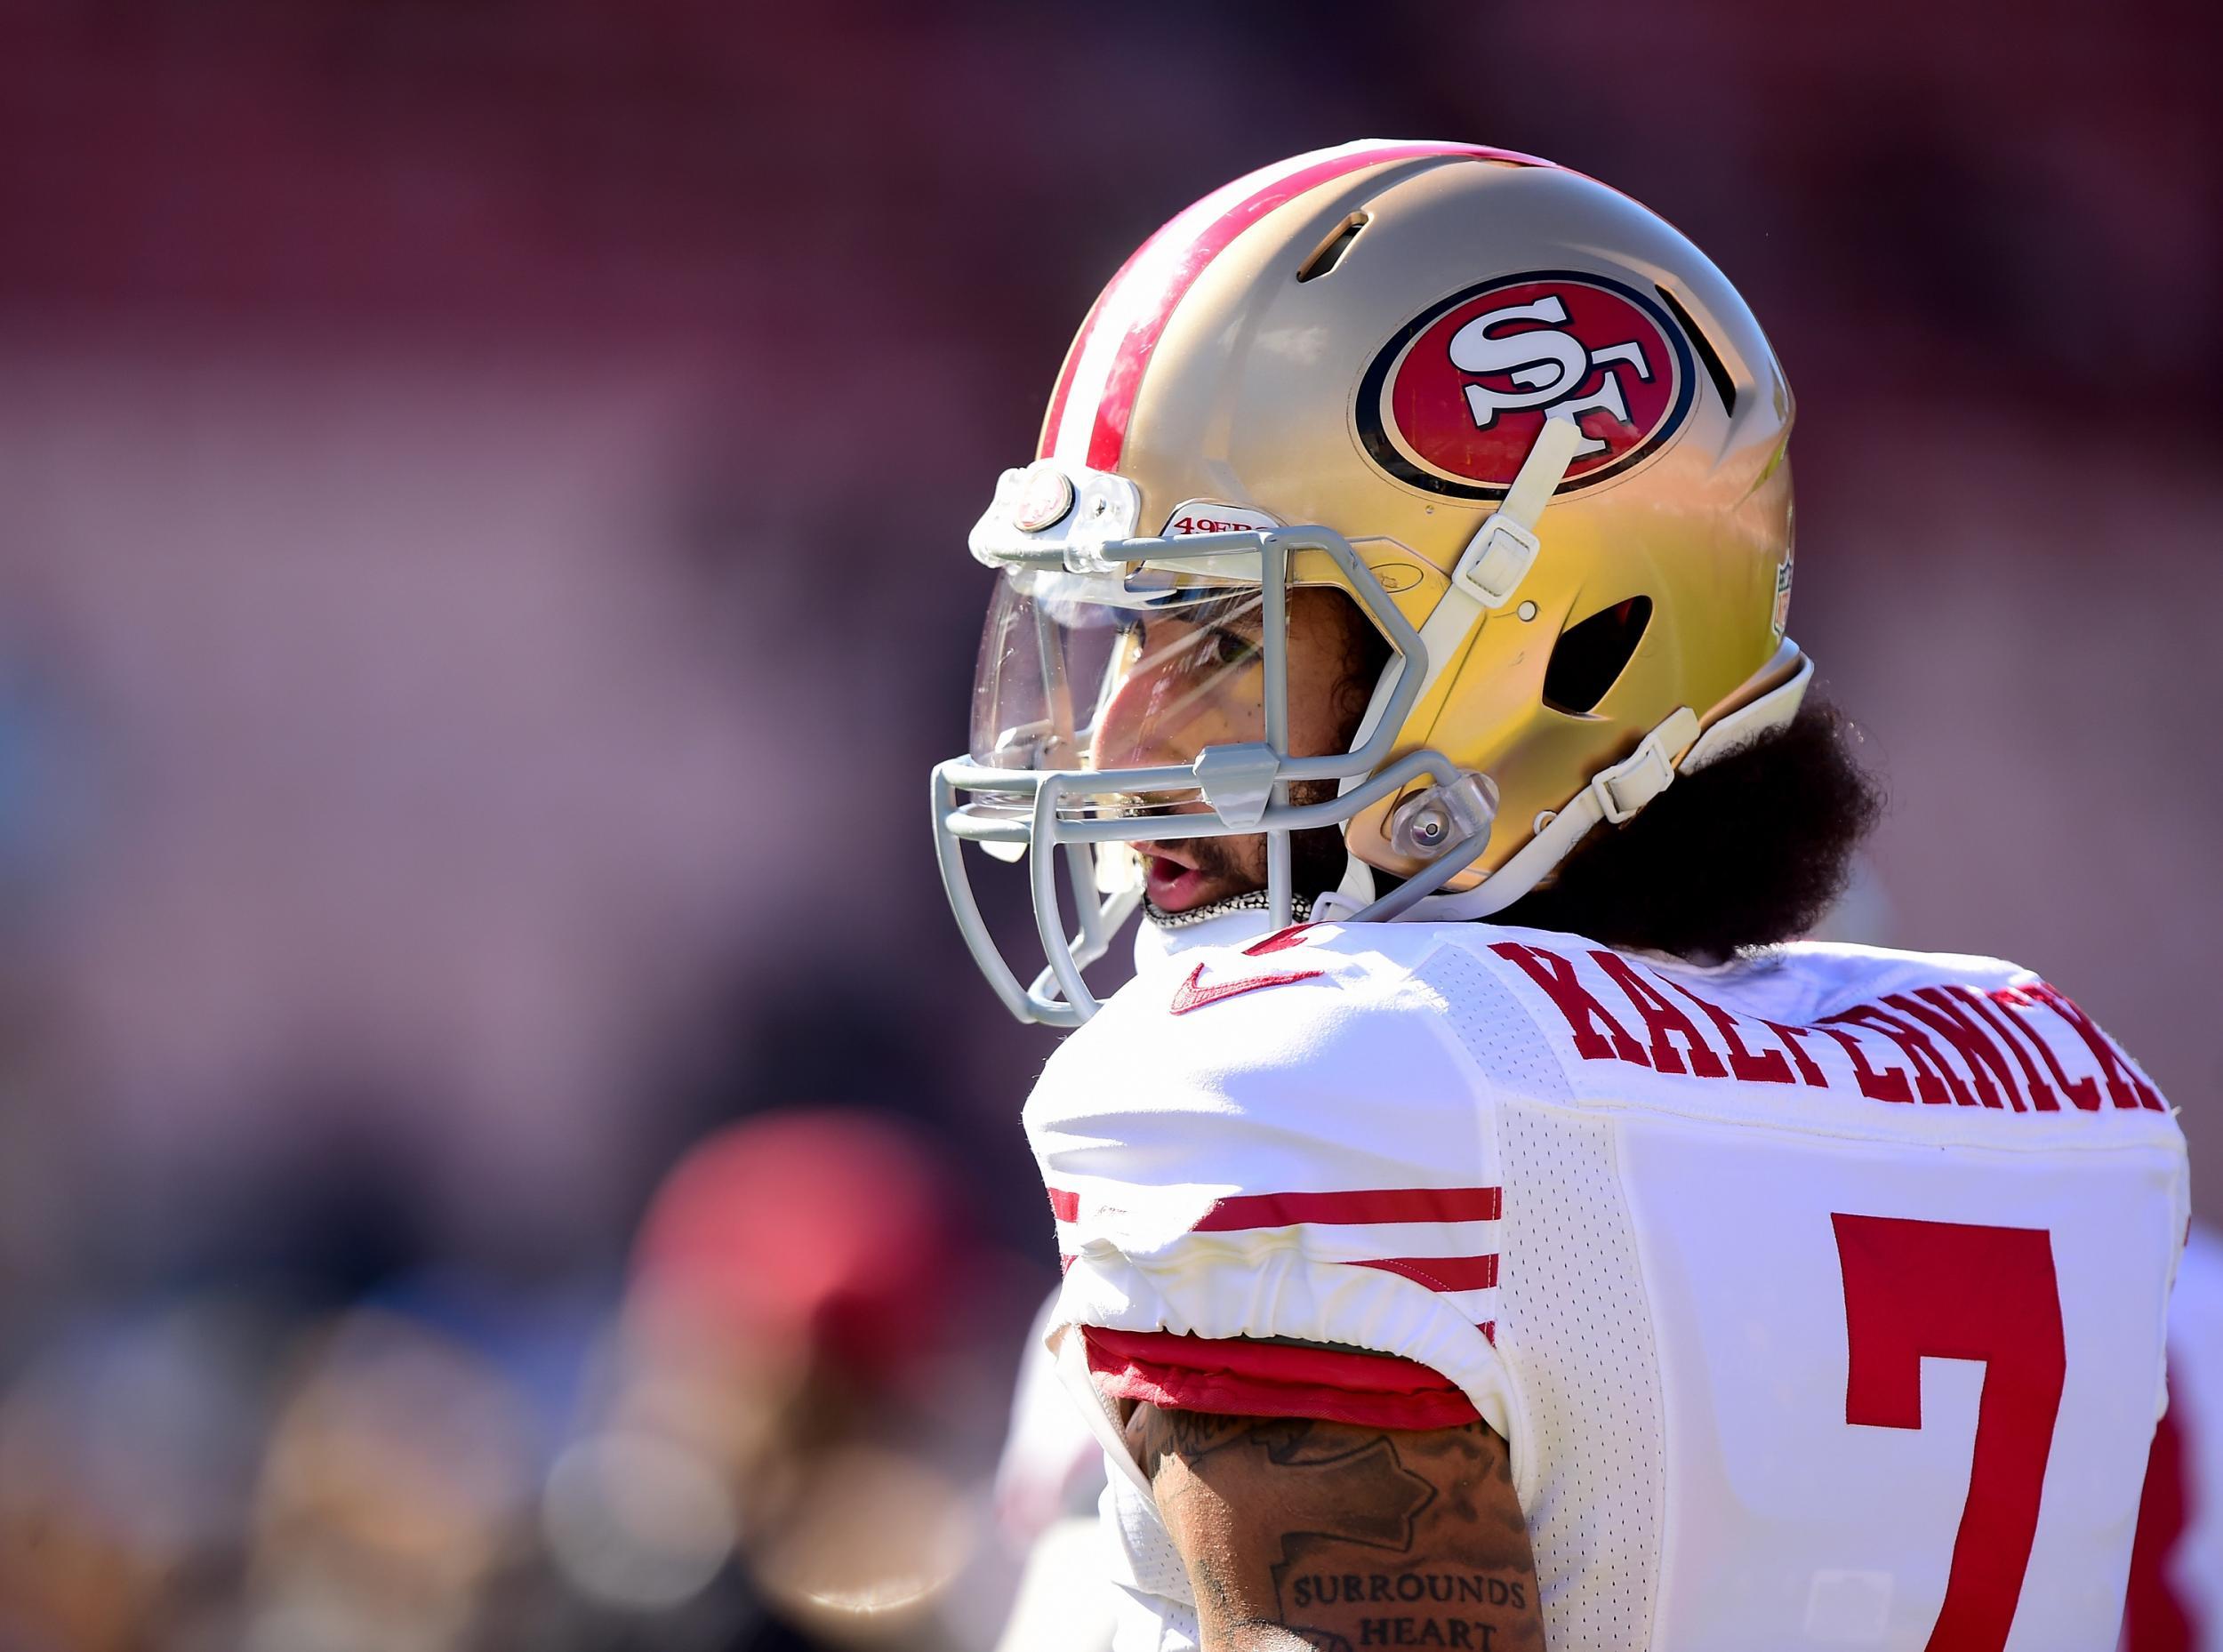 Kaepernick has stayed silent, but is now taking legal action against the NFL